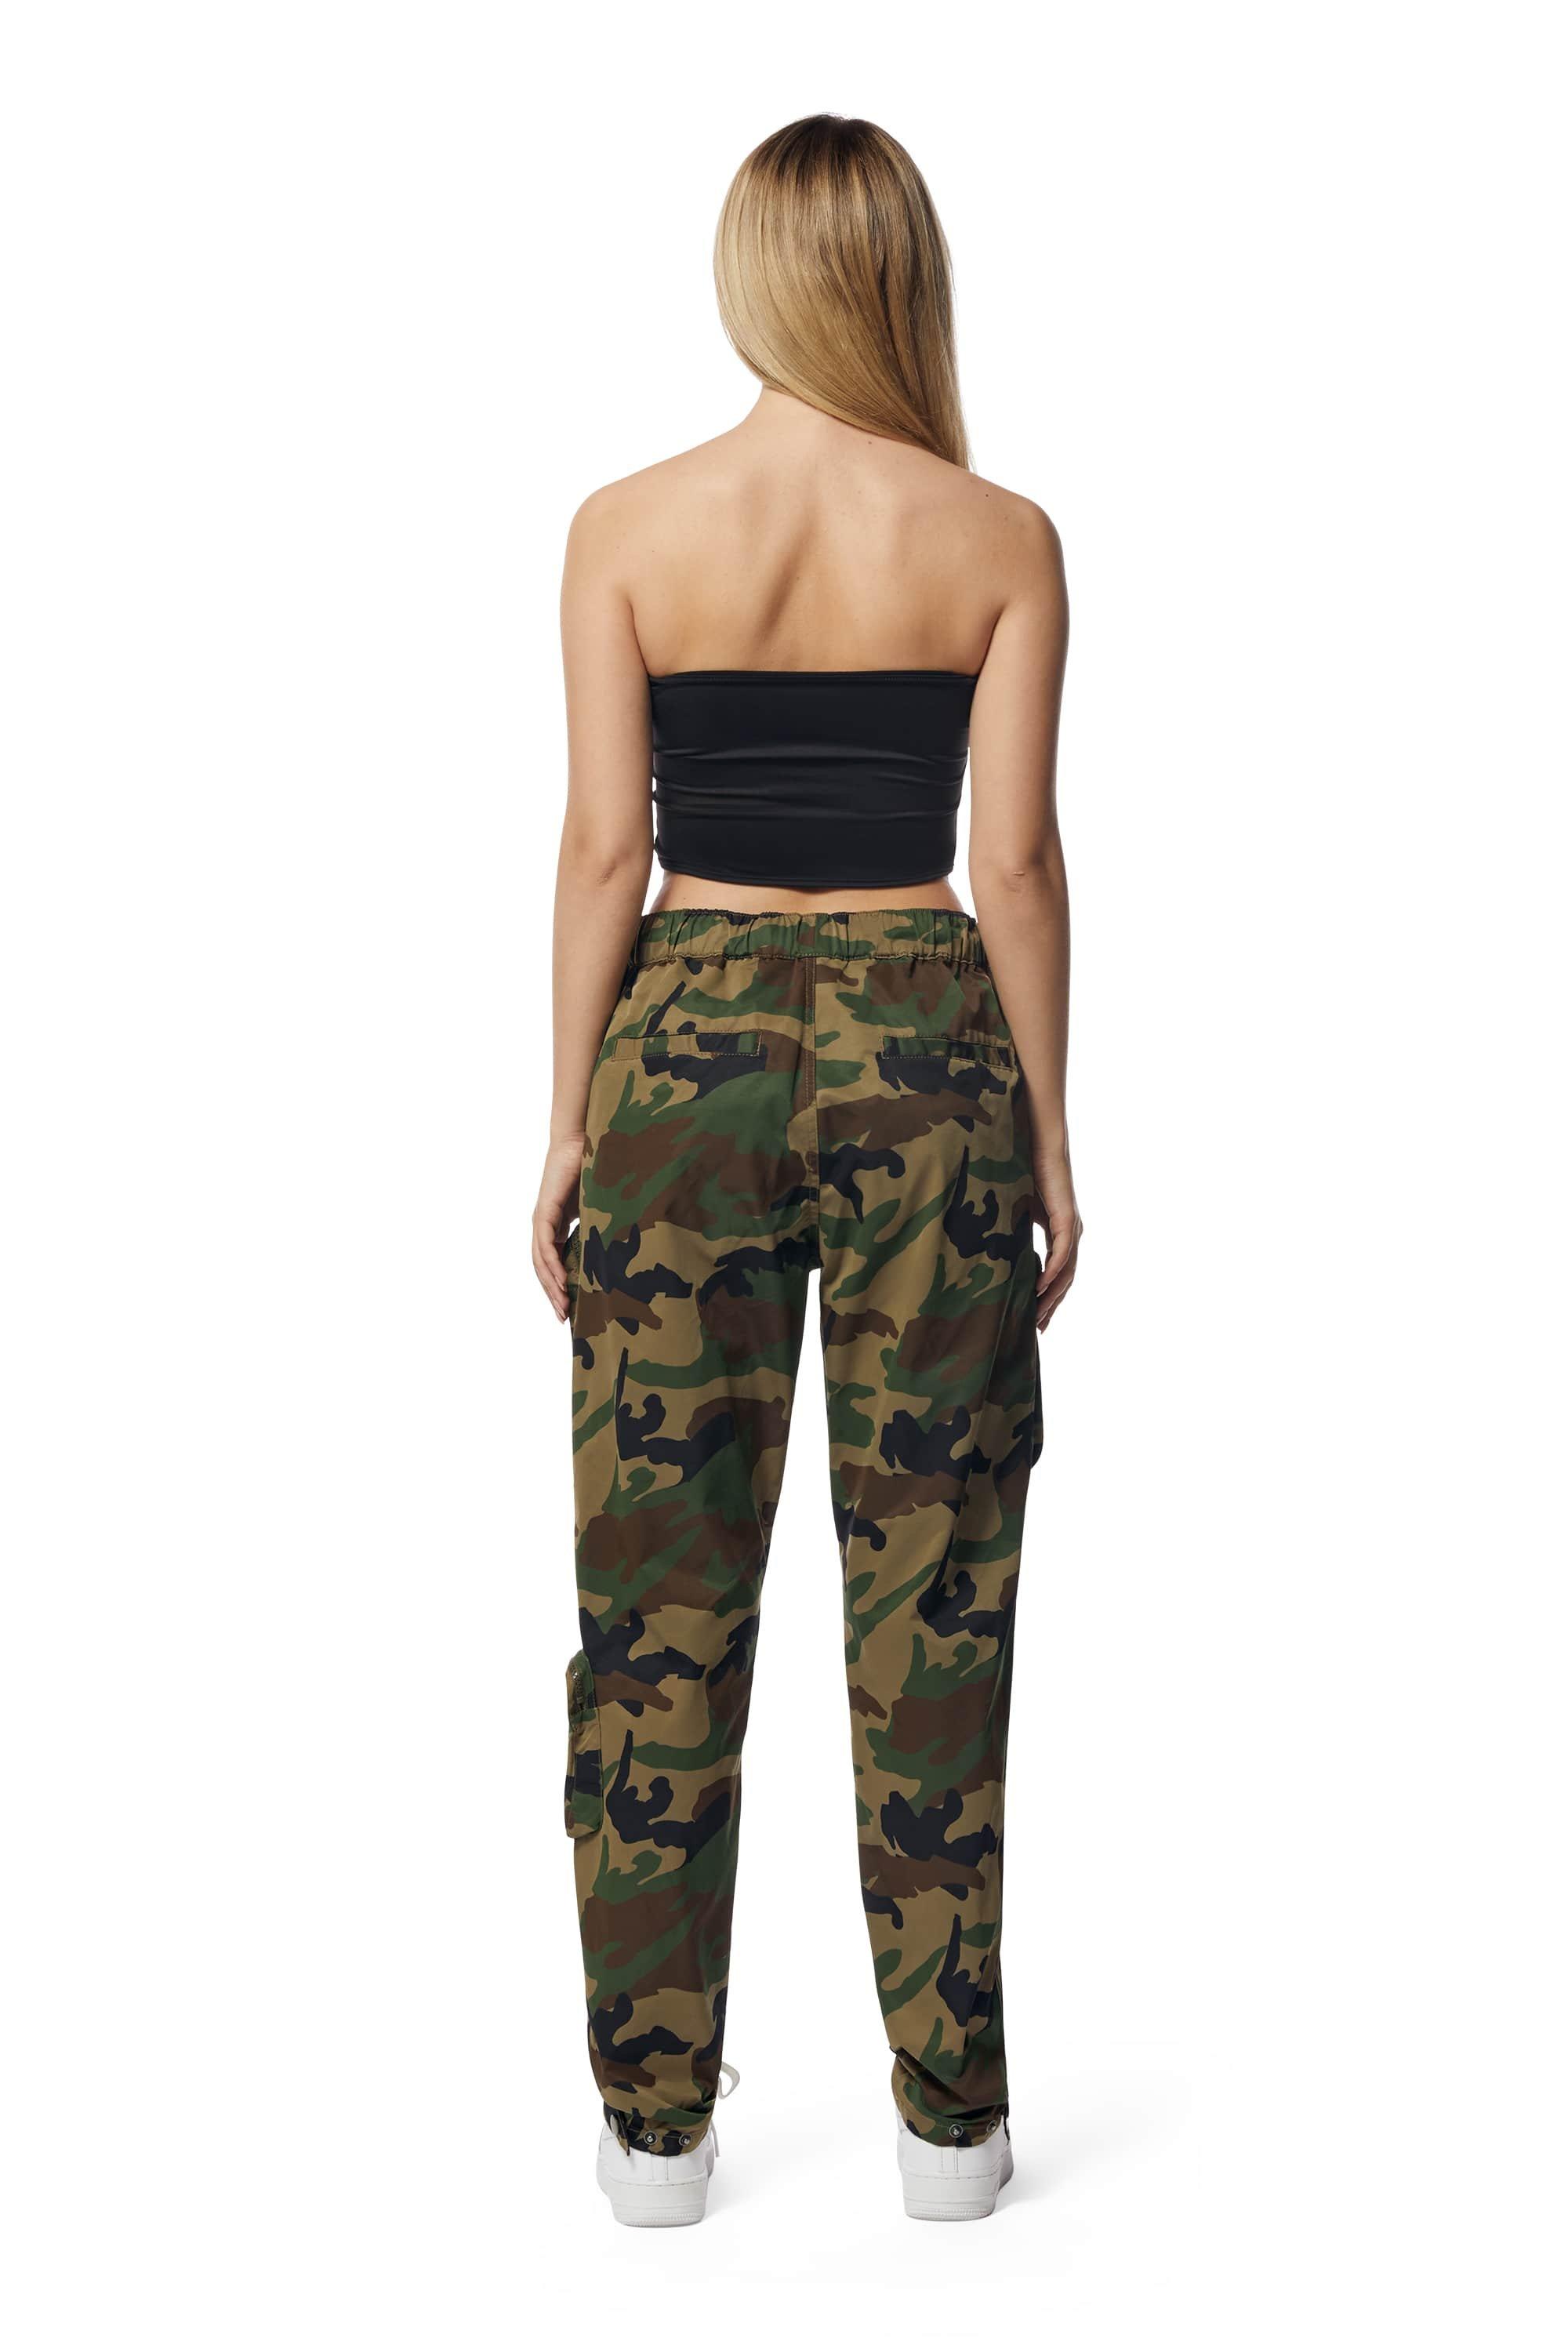 uhnmki Womens Cargo Pants with Pockets Outdoor Casual Ripstop Camo  Construction Work Pants Baggy Cargo Pants Women at  Women's Clothing  store